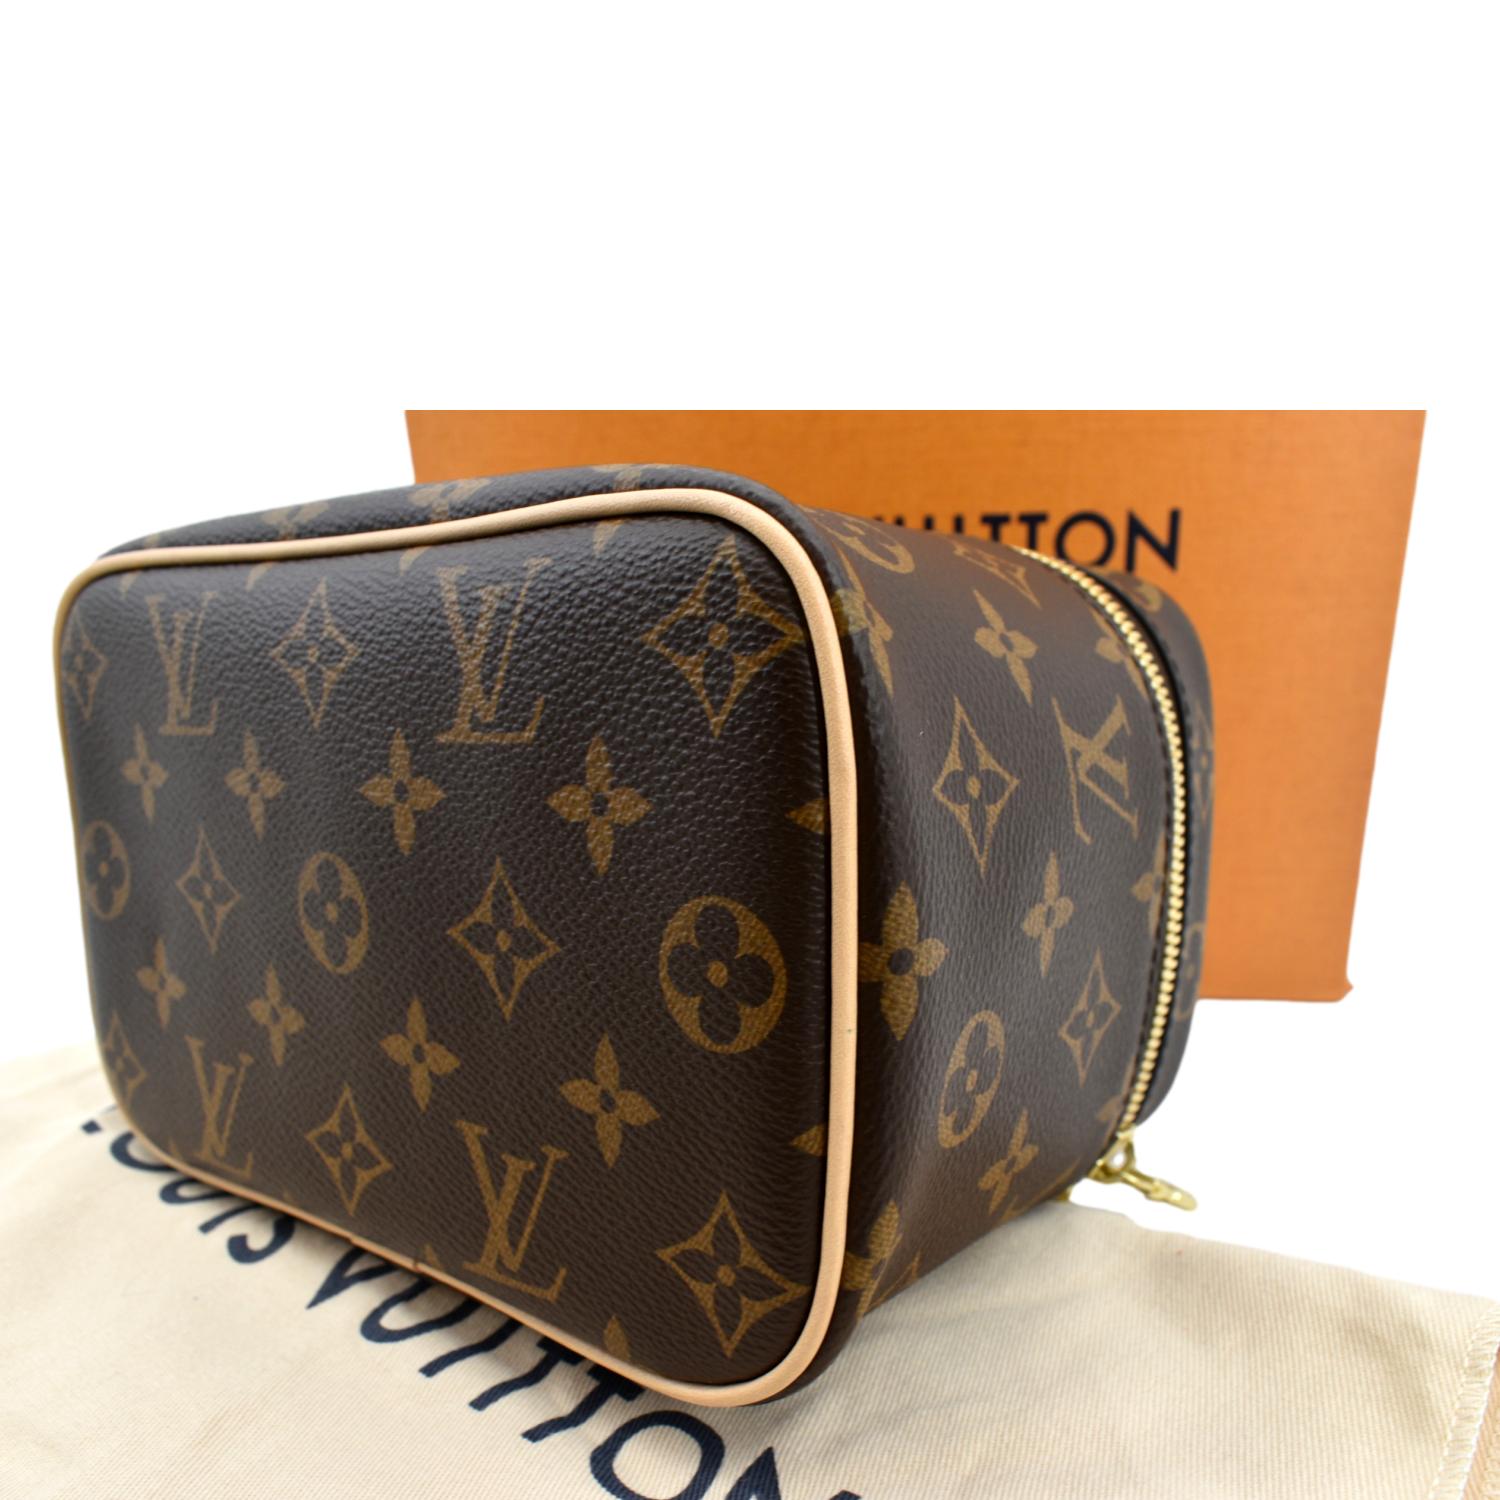 🧡 LOUIS VUITTON NICE MINI TOILETRY POUCH UNBOXING, REVIEW, AND WHAT FITS  🧡 